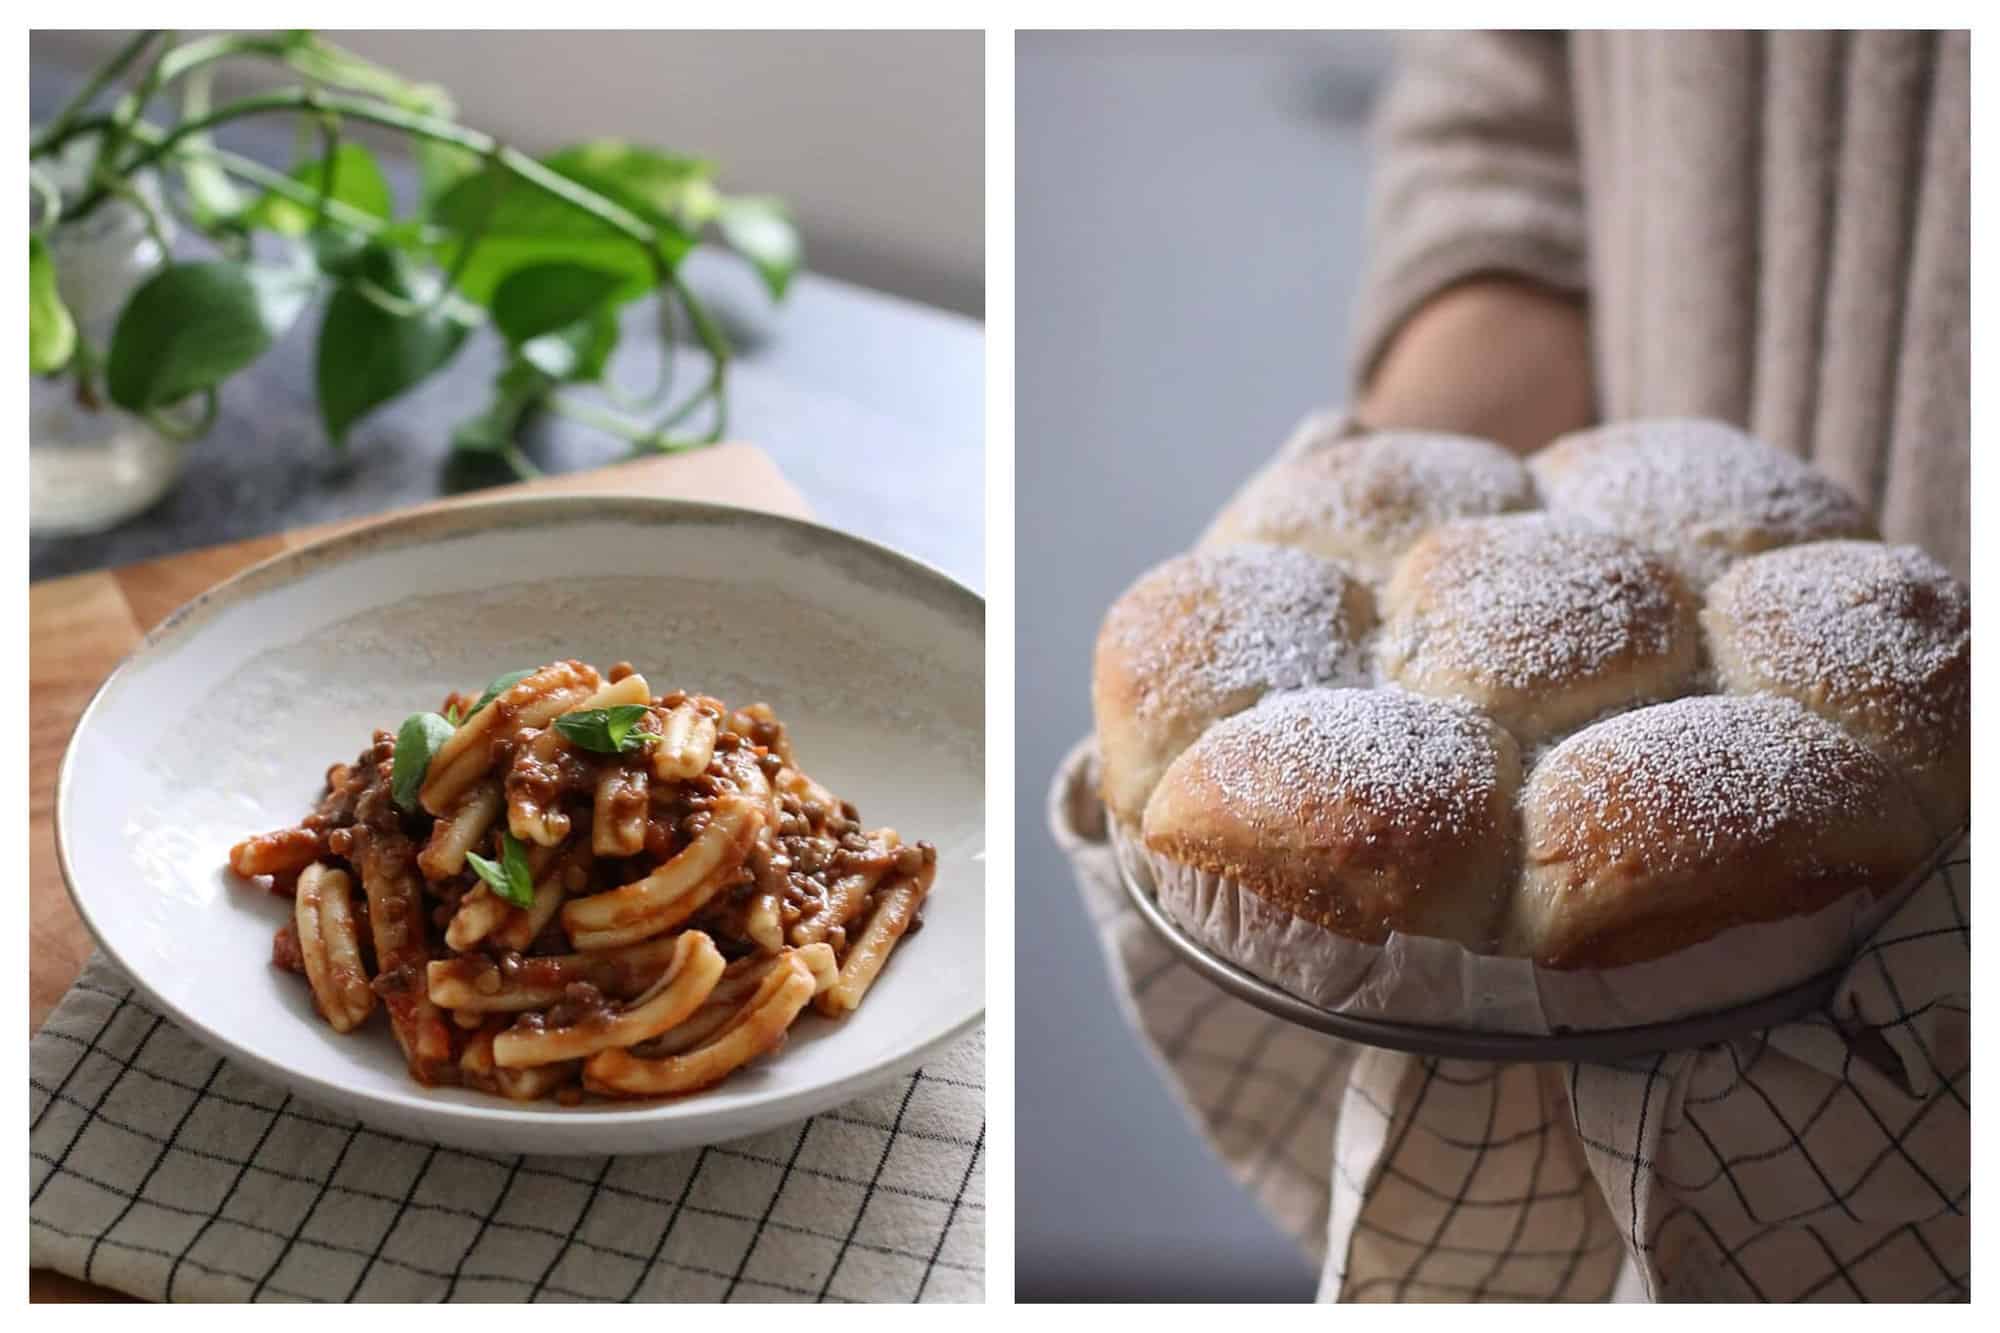 Left: Pasta with meat sauce in a plate. Right: Pastries fresh out of the oven.